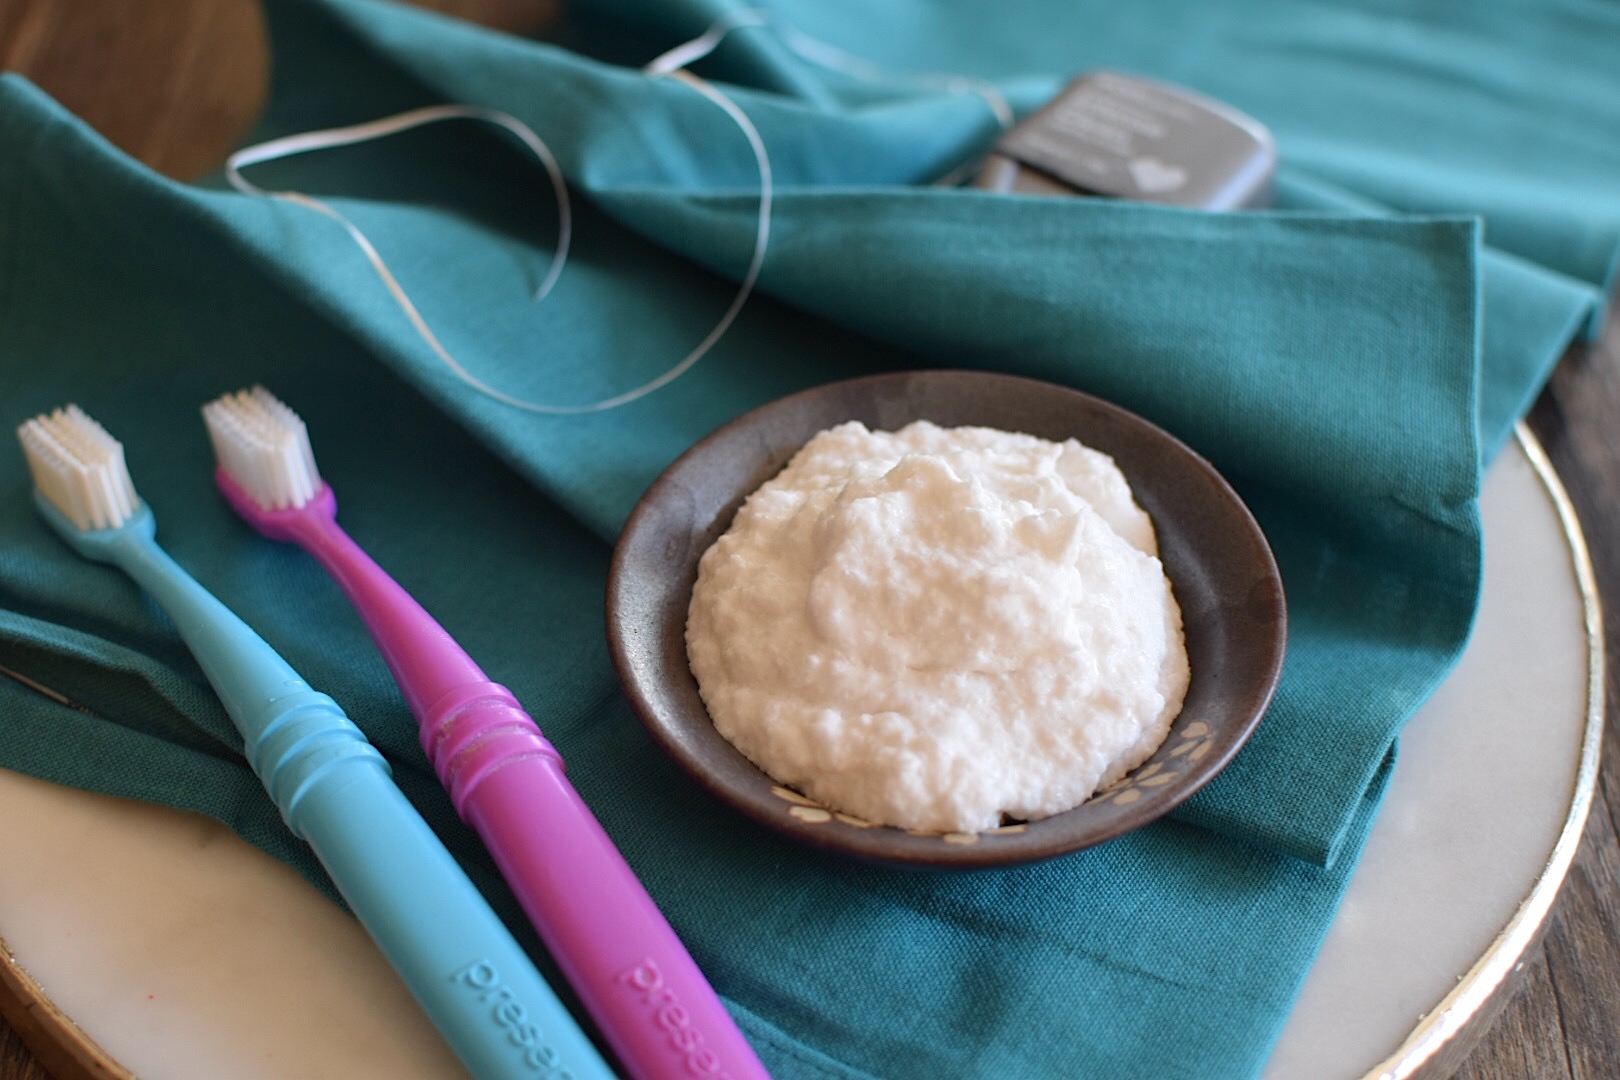 Homemade Remineralizing Toothpaste